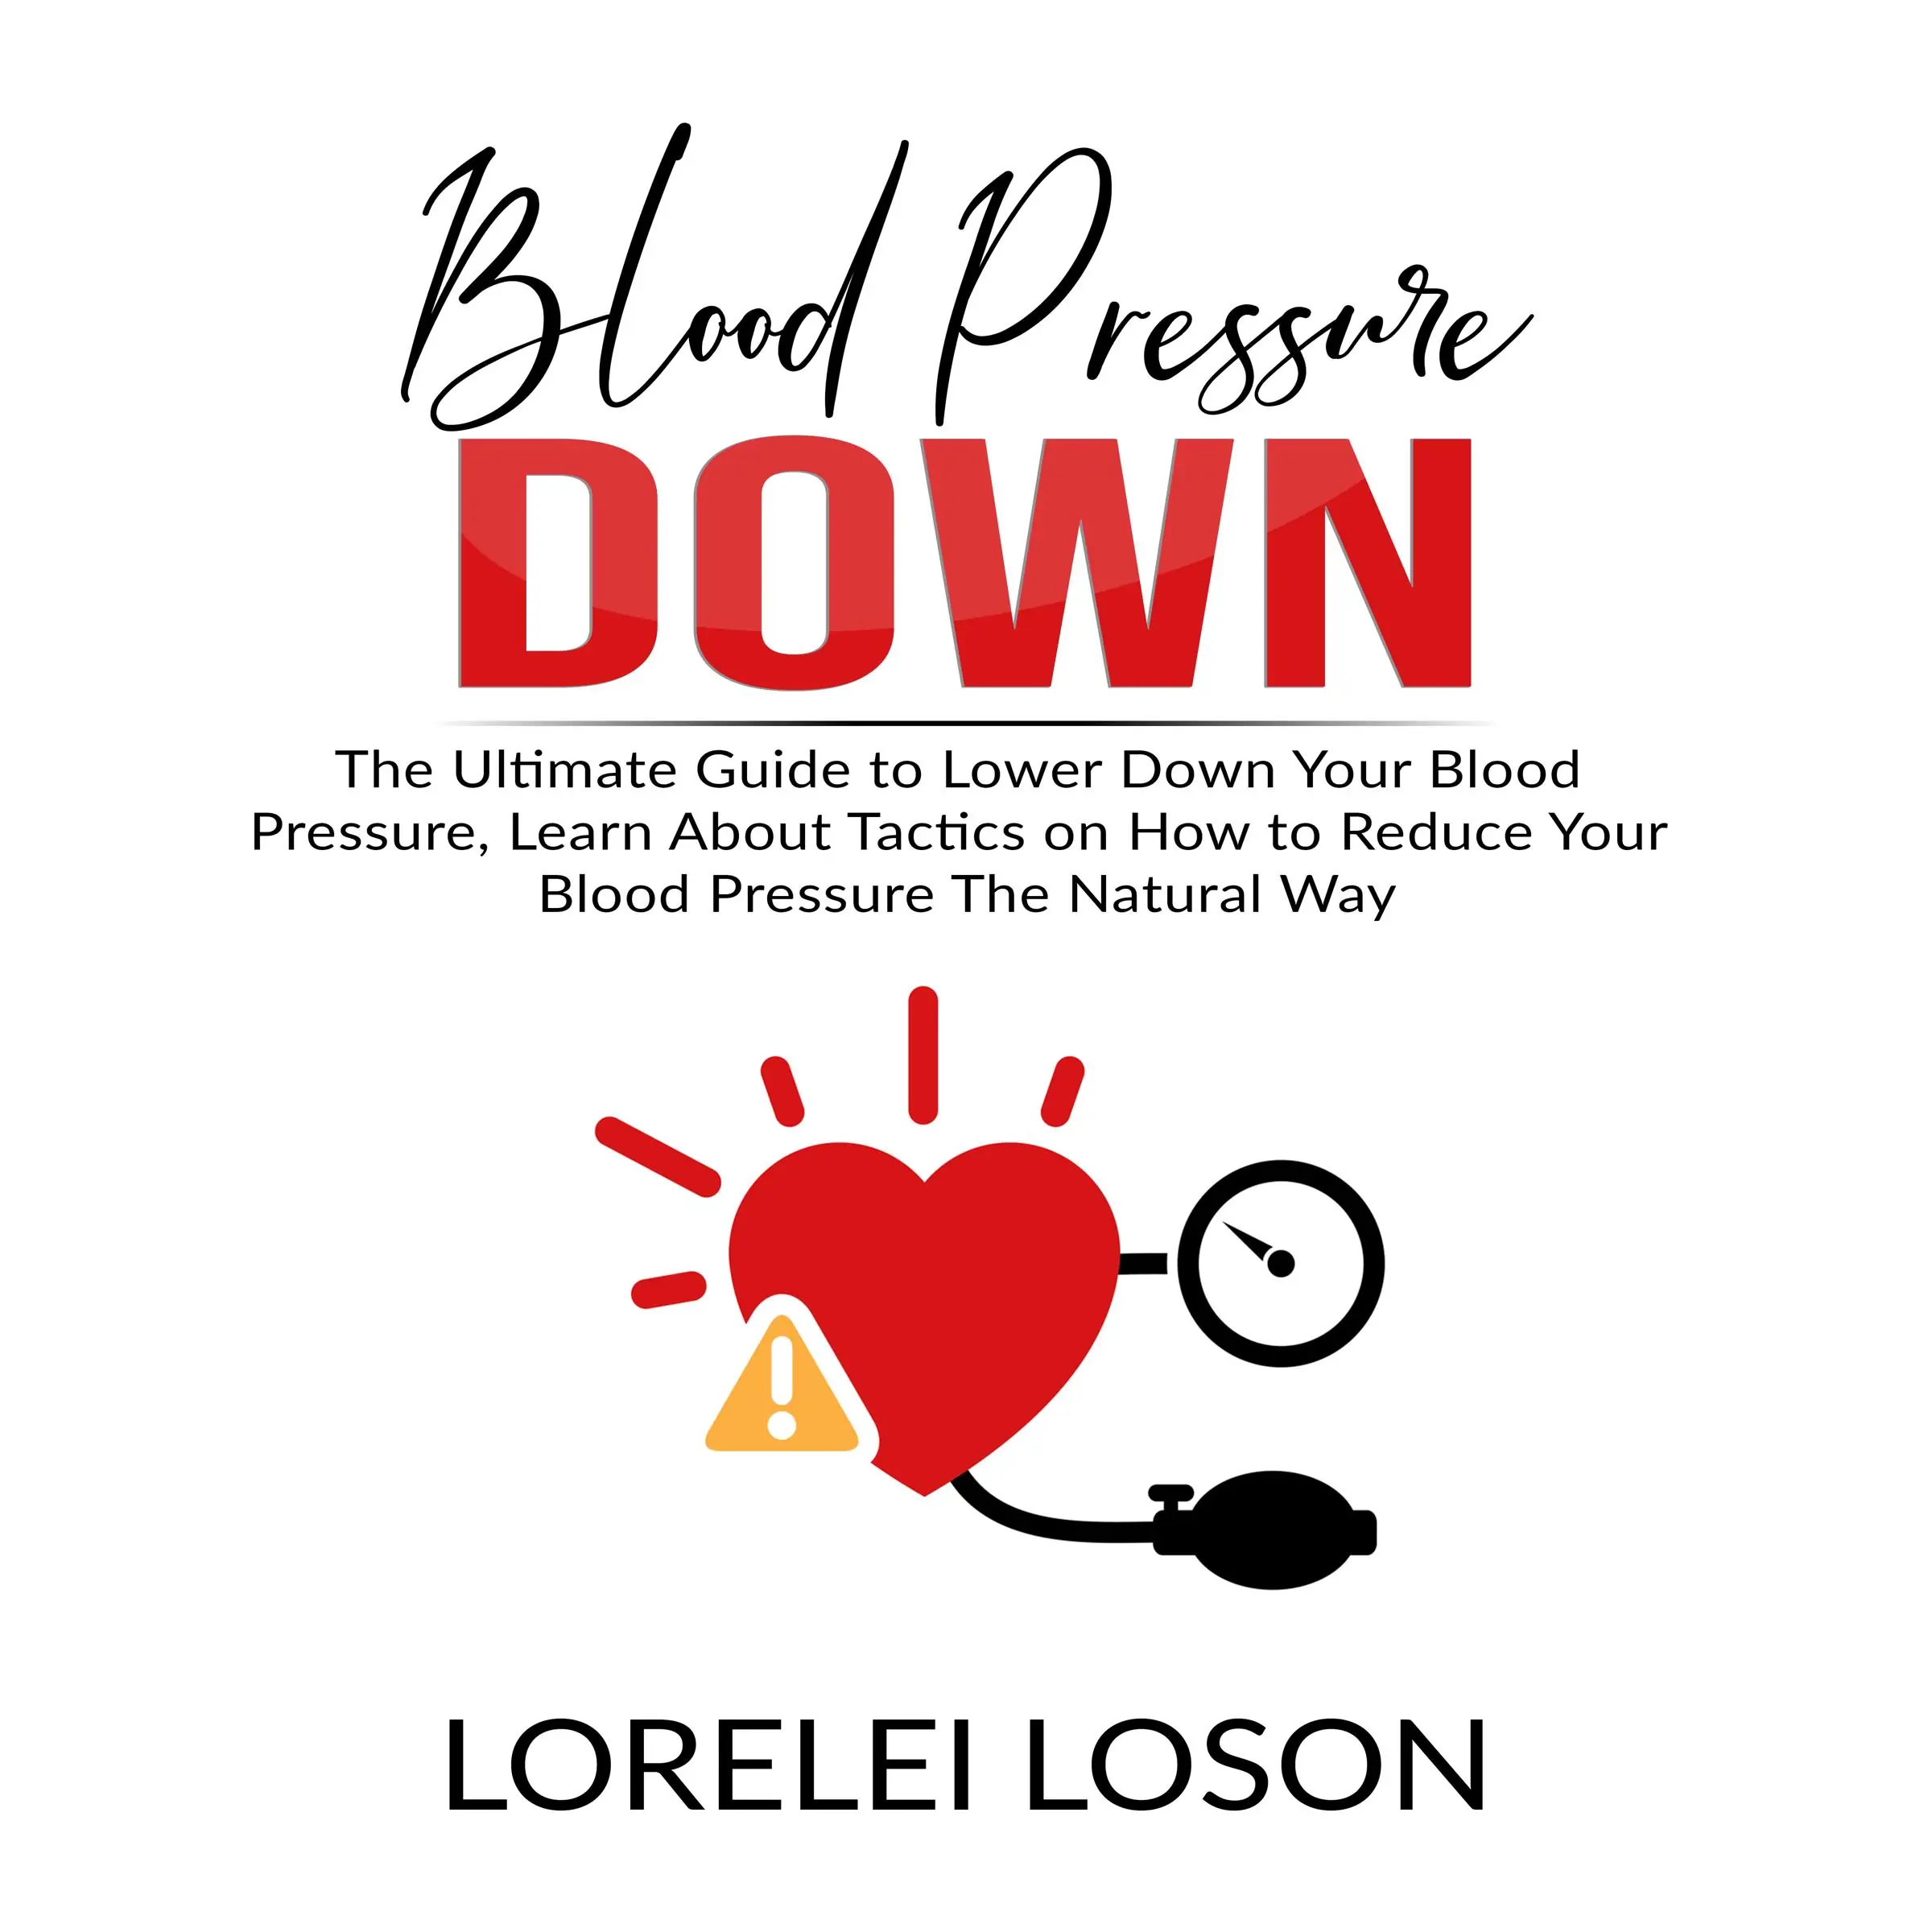 Blood Pressure Down: The Ultimate Guide to Lower Down Your Blood Pressure, Learn About Tactics on How to Reduce Your Blood Pressure The Natural Way by Lorelei Loson Audiobook